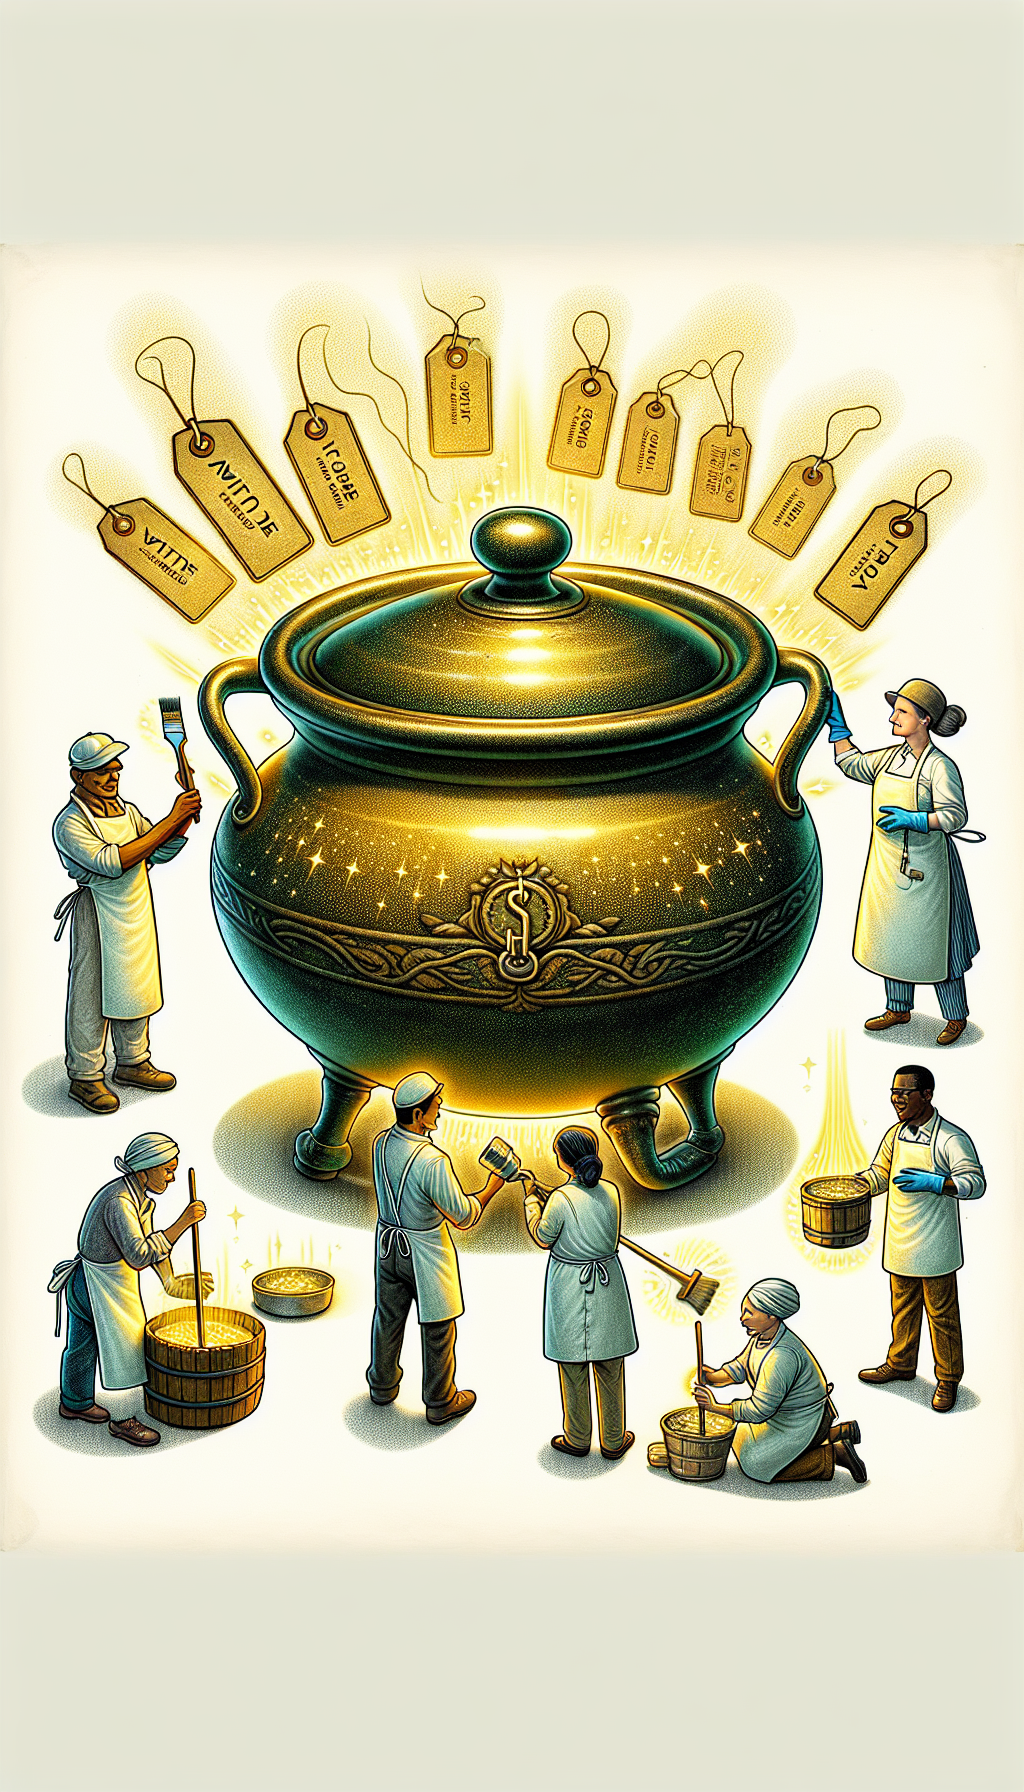 An illustration features a gleaming, detailed 20-gallon antique crock, with translucent “value” tags ascending like bubbles, while tiny, stylistically varied characters — a painter, a cleaner, and a curator — attentively polish, repair, and handle it with care, each employing tools that shine with golden light to emphasize the importance of preservation in maintaining the crock's value.